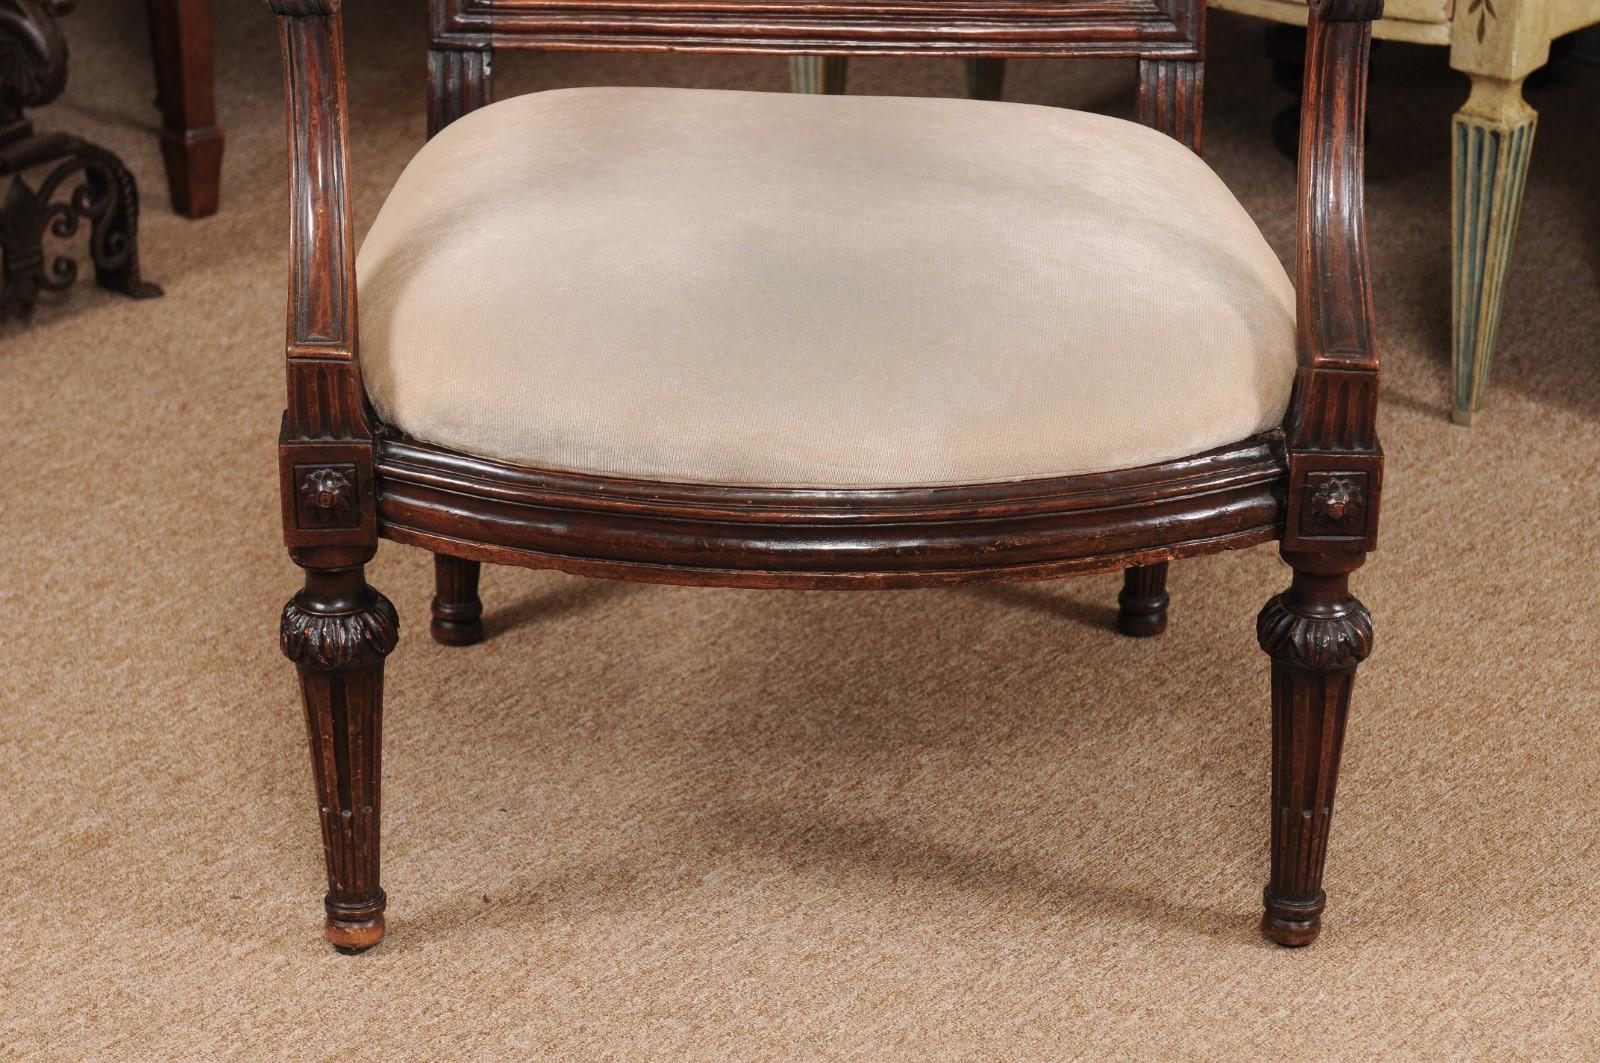 18th Century Neoclassical Period Walnut Armchair with Fluted Tapering Legs, Italy, ca. 1790 For Sale